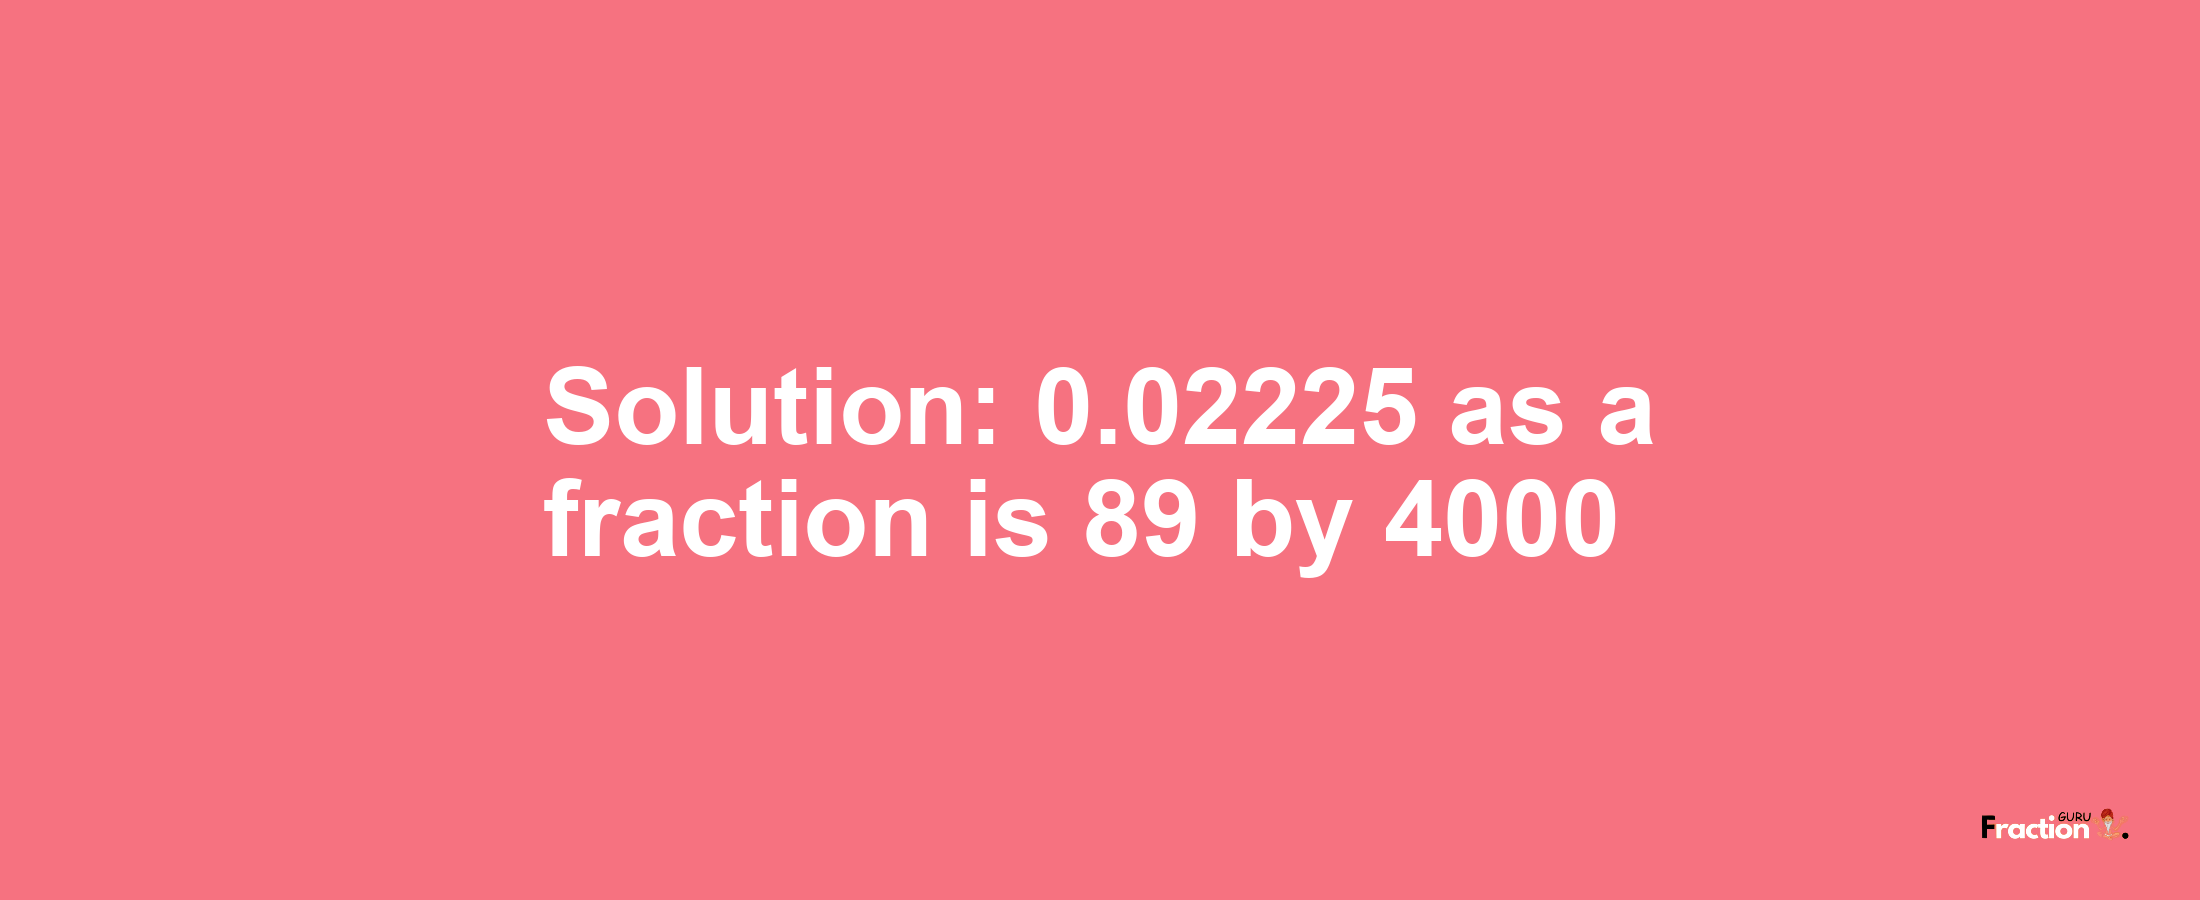 Solution:0.02225 as a fraction is 89/4000